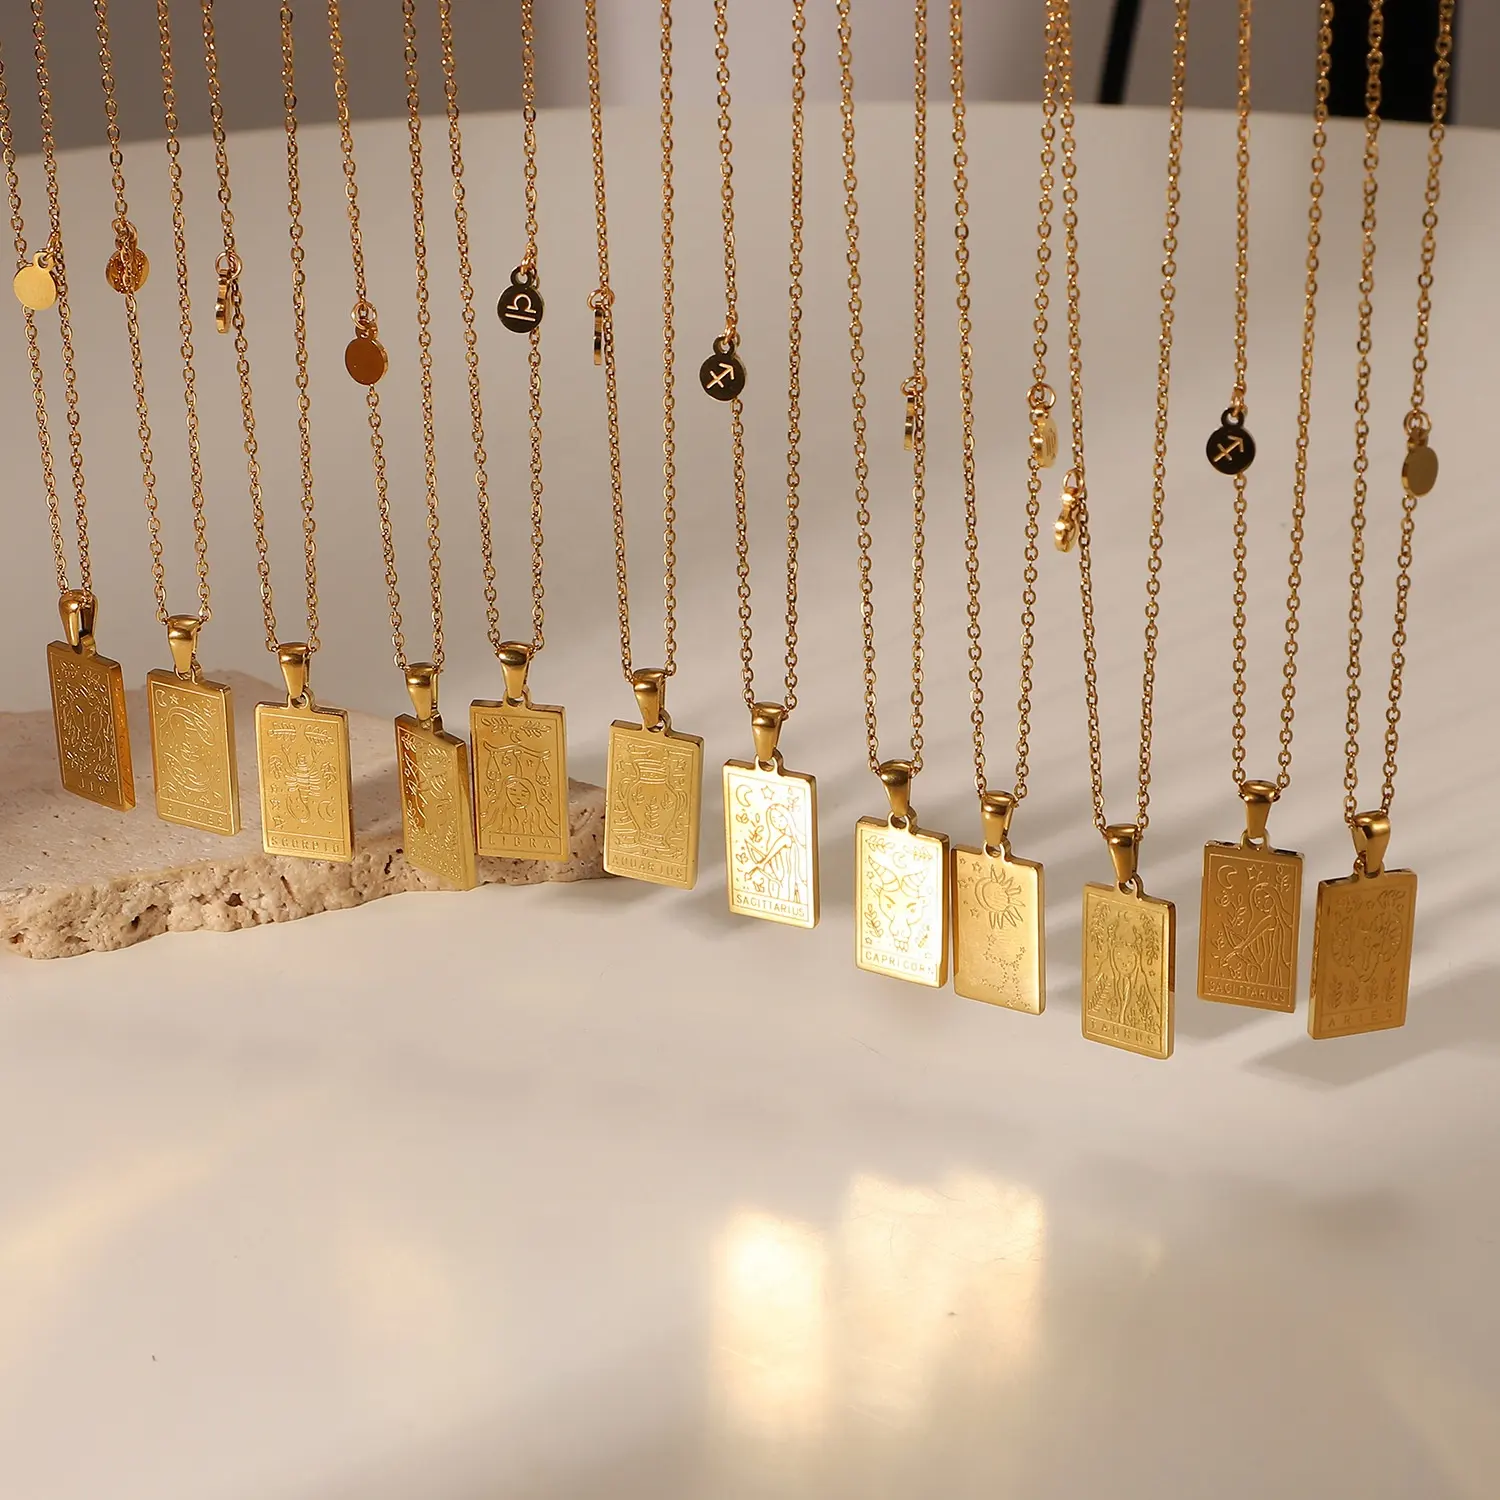 Vintage 12 Horoscope Female Jewelry Sets Square Pendant Gold Plated Necklaces Women Tarot Zodiac Sign Stainless Steel Chain Men